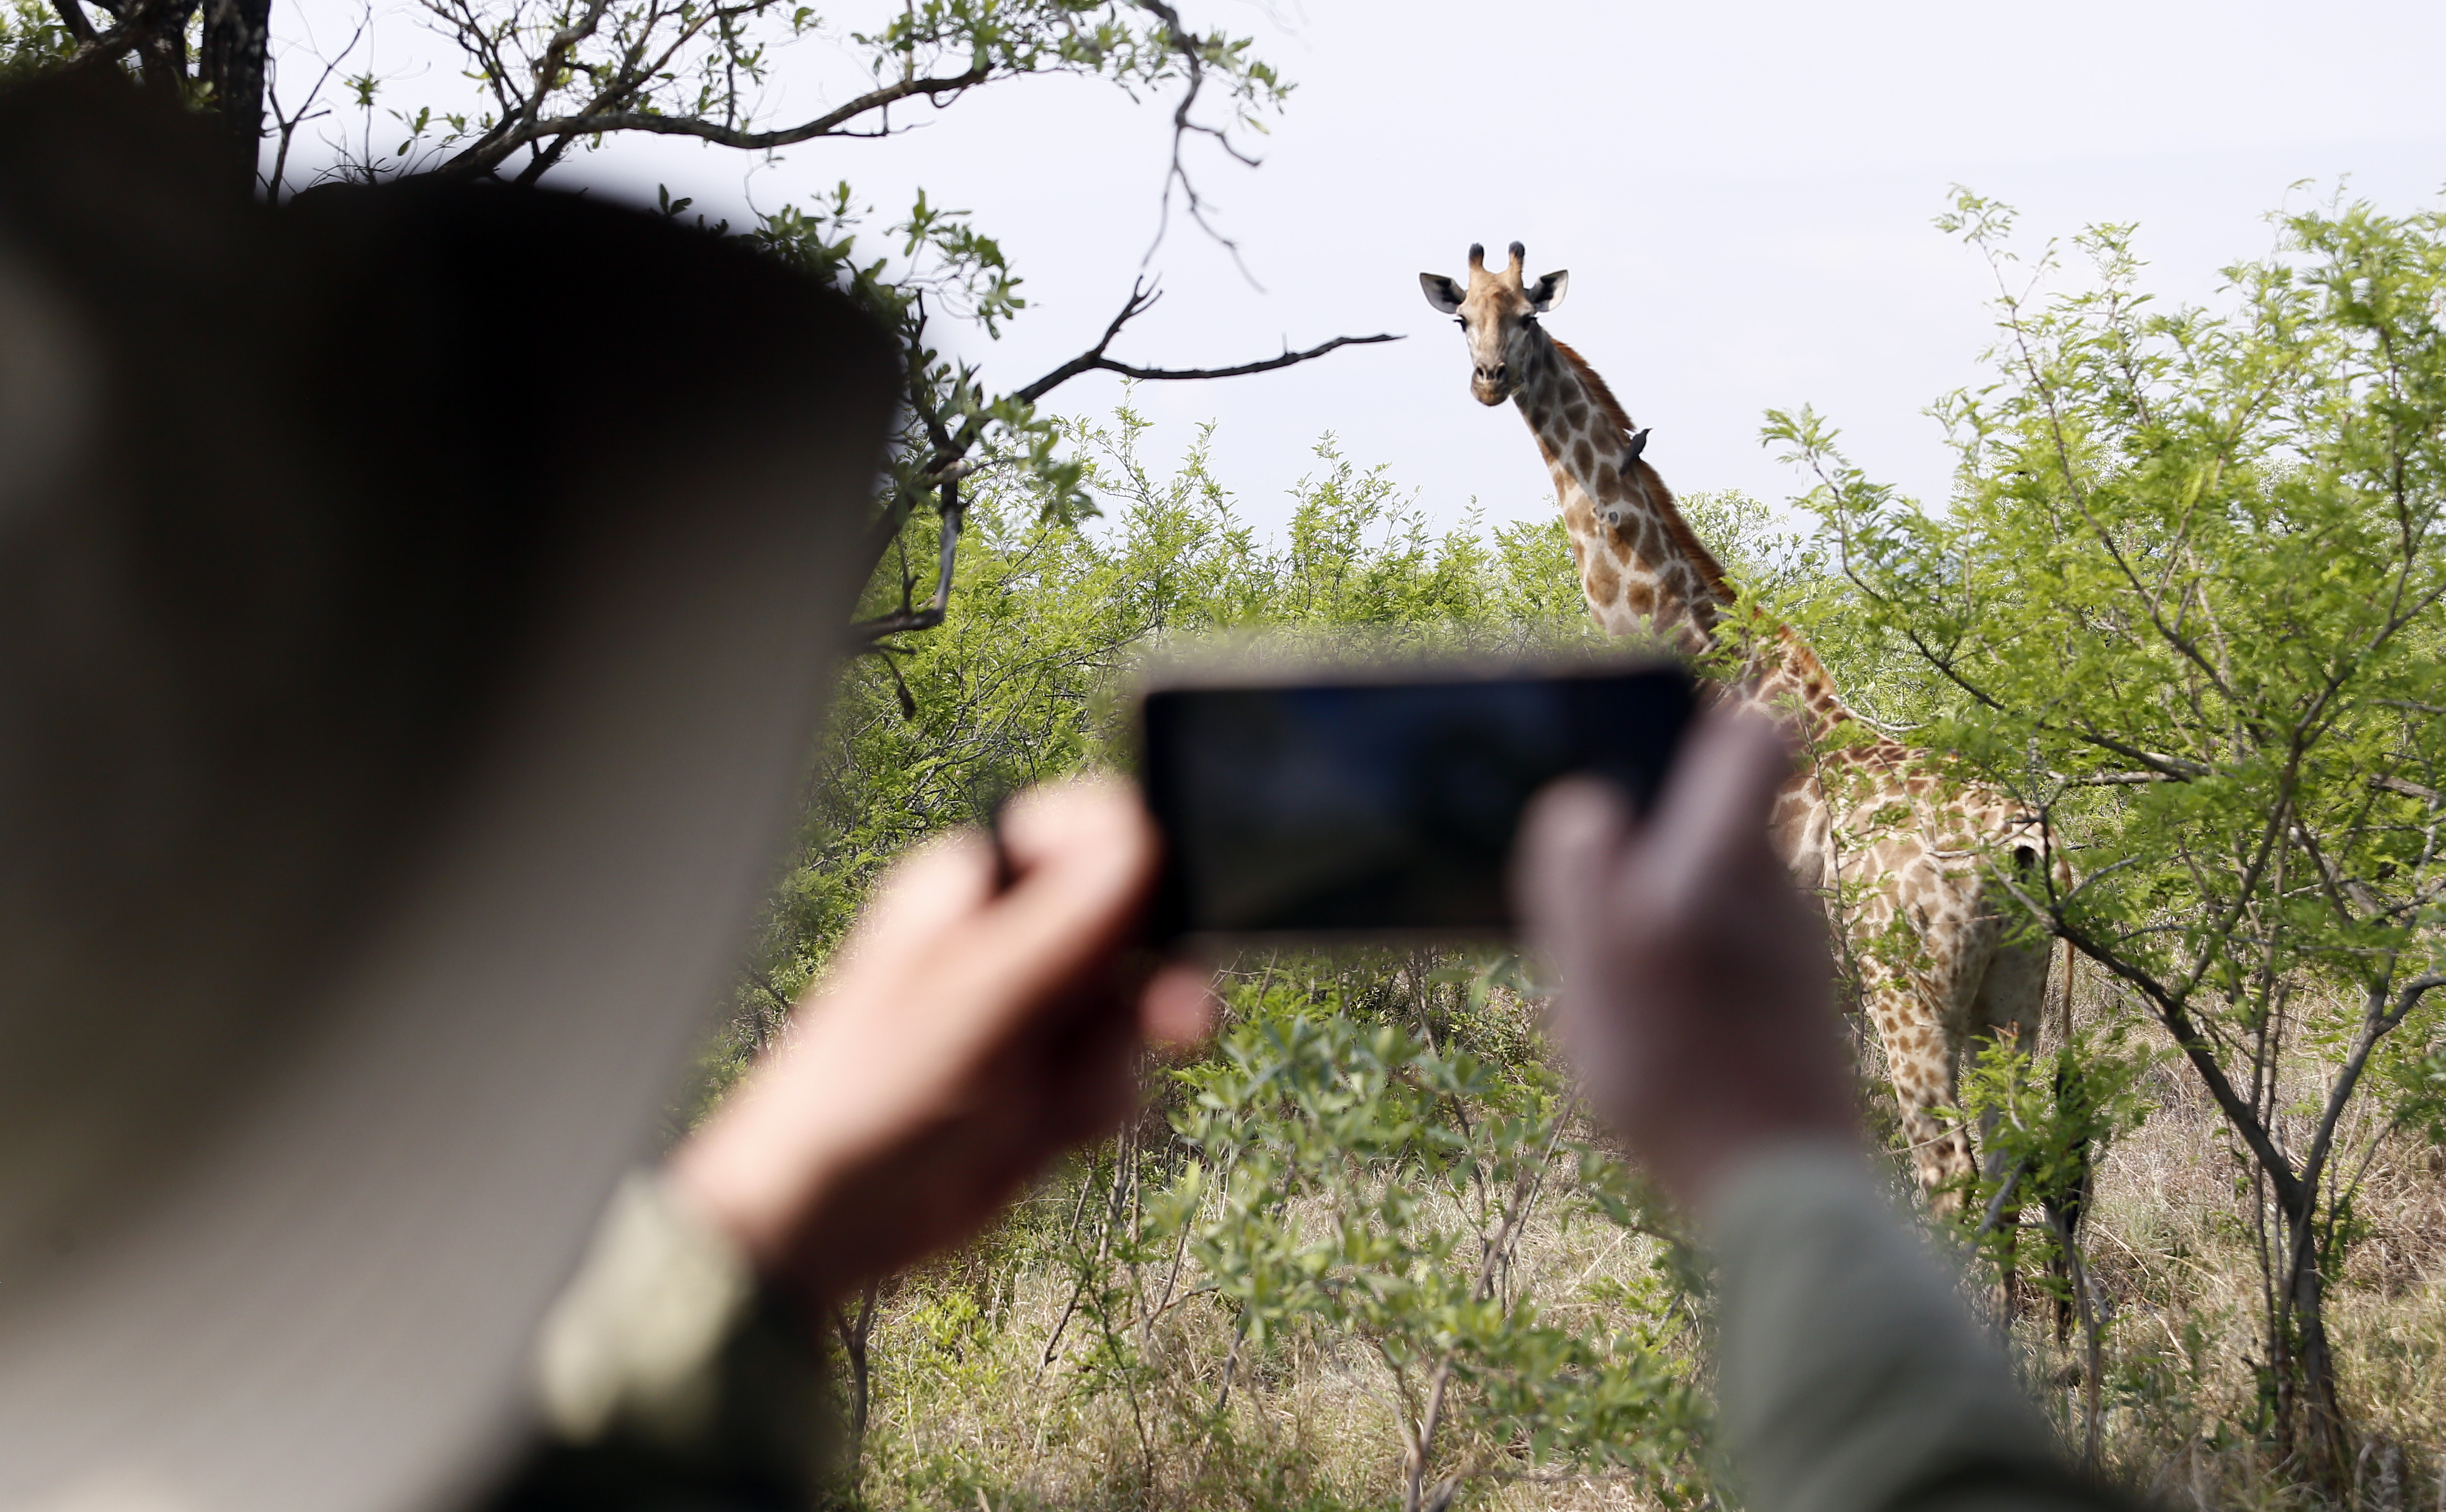 MBOMBELA, SOUTH AFRICA – OCTOBER 18: A giraffe at the Numbi Gate of the Kruger National Park on October 18, 2022 in Mbombela, South Africa. It is reported that the US embassy has issued a security alert for the Kruger National Park's Numbi Gate after a German tourist was killed near the gate earlier this month. (Photo by Gallo Images/Daily Maverick/Felix Dlangamandla)